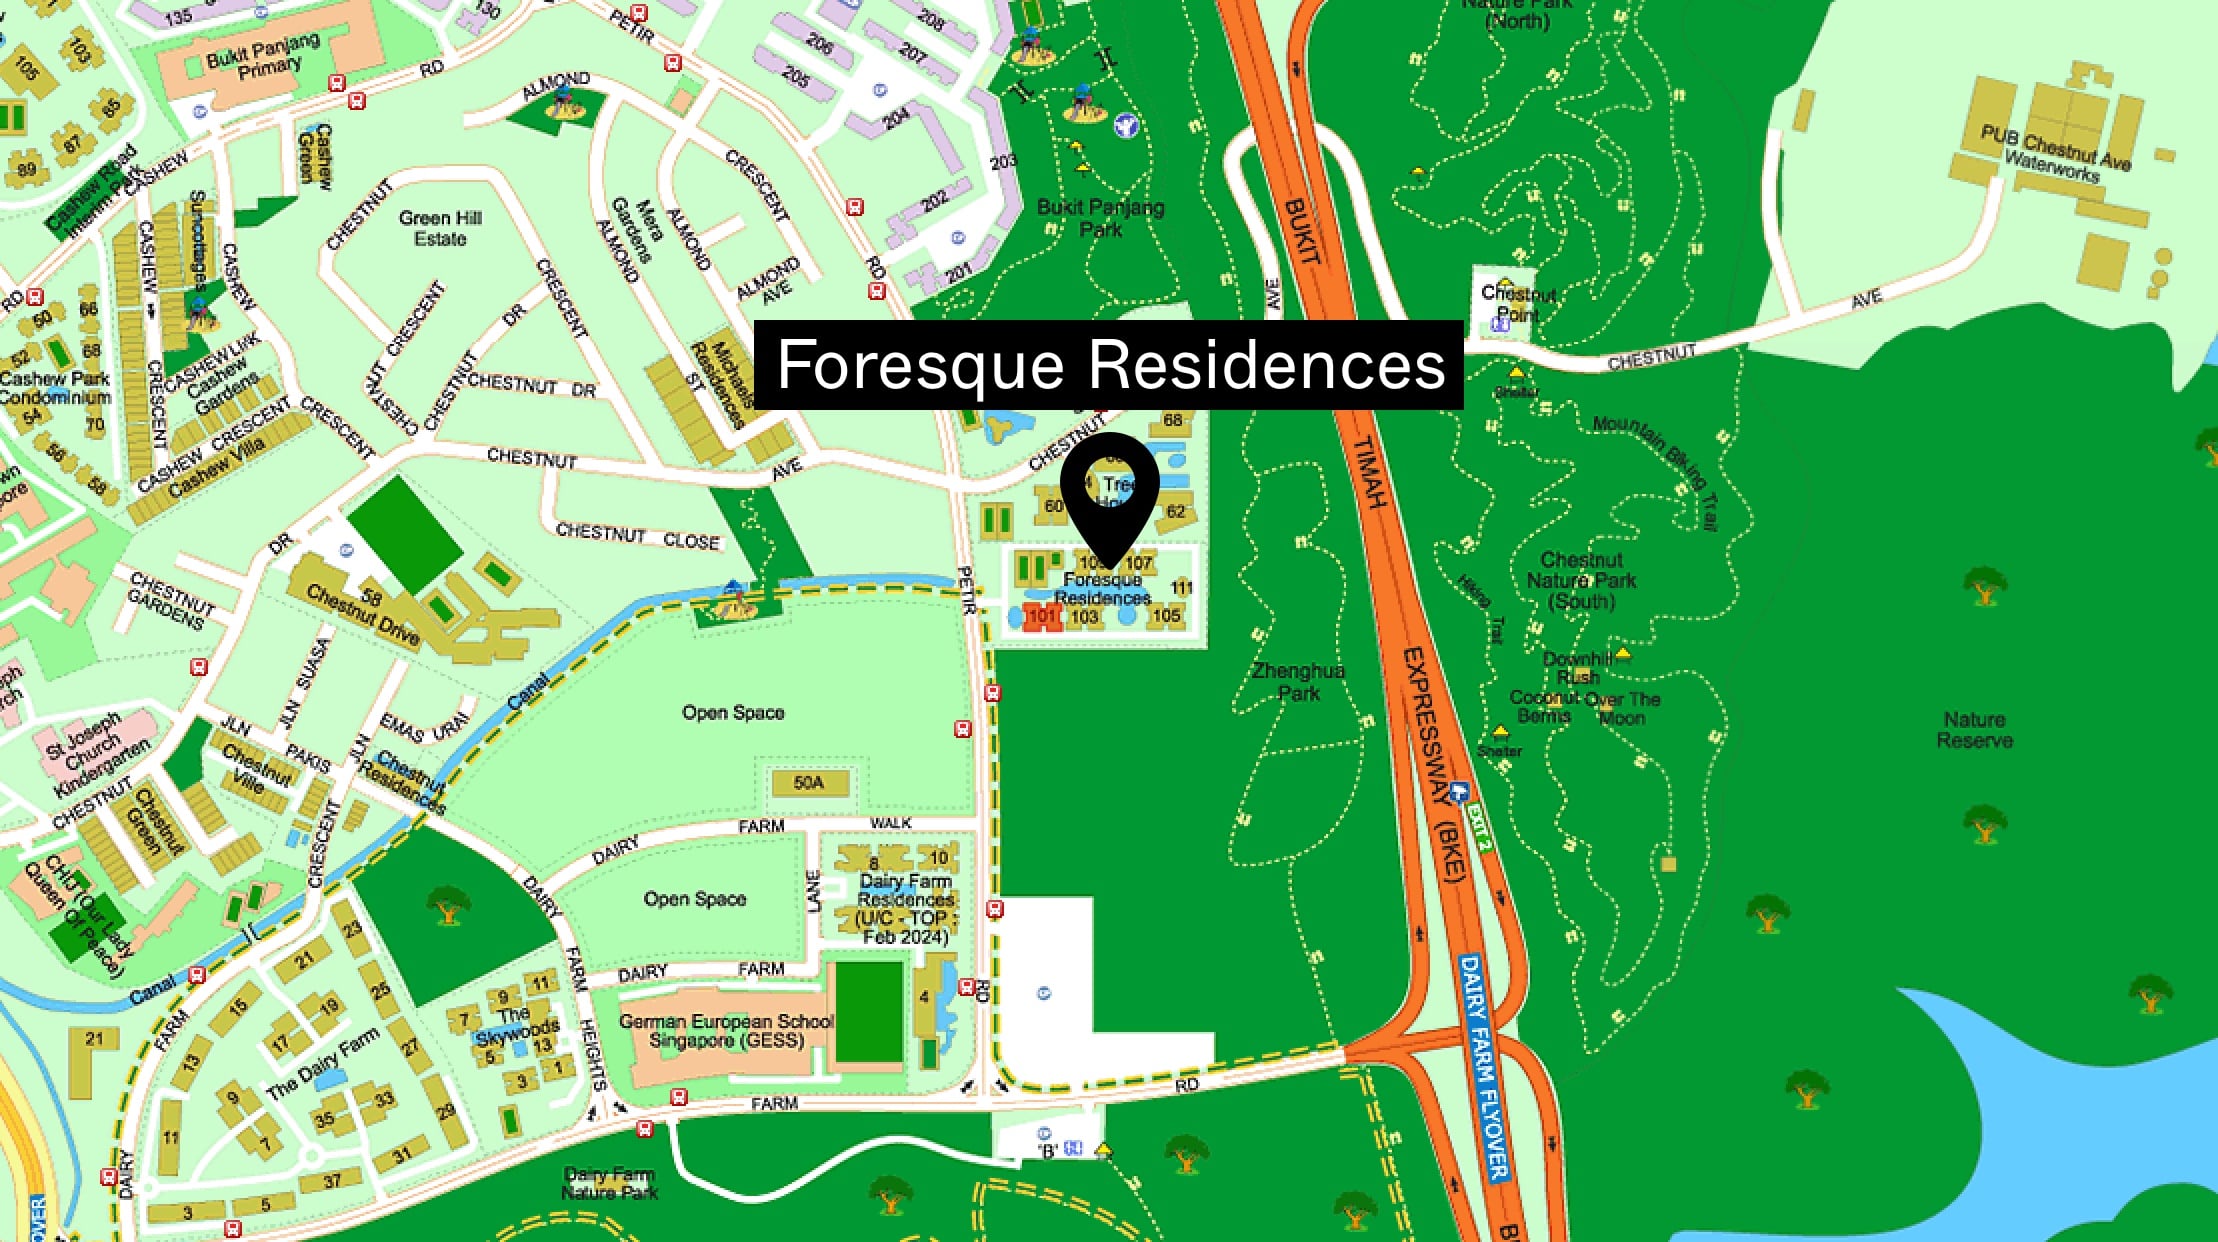 foresque residences